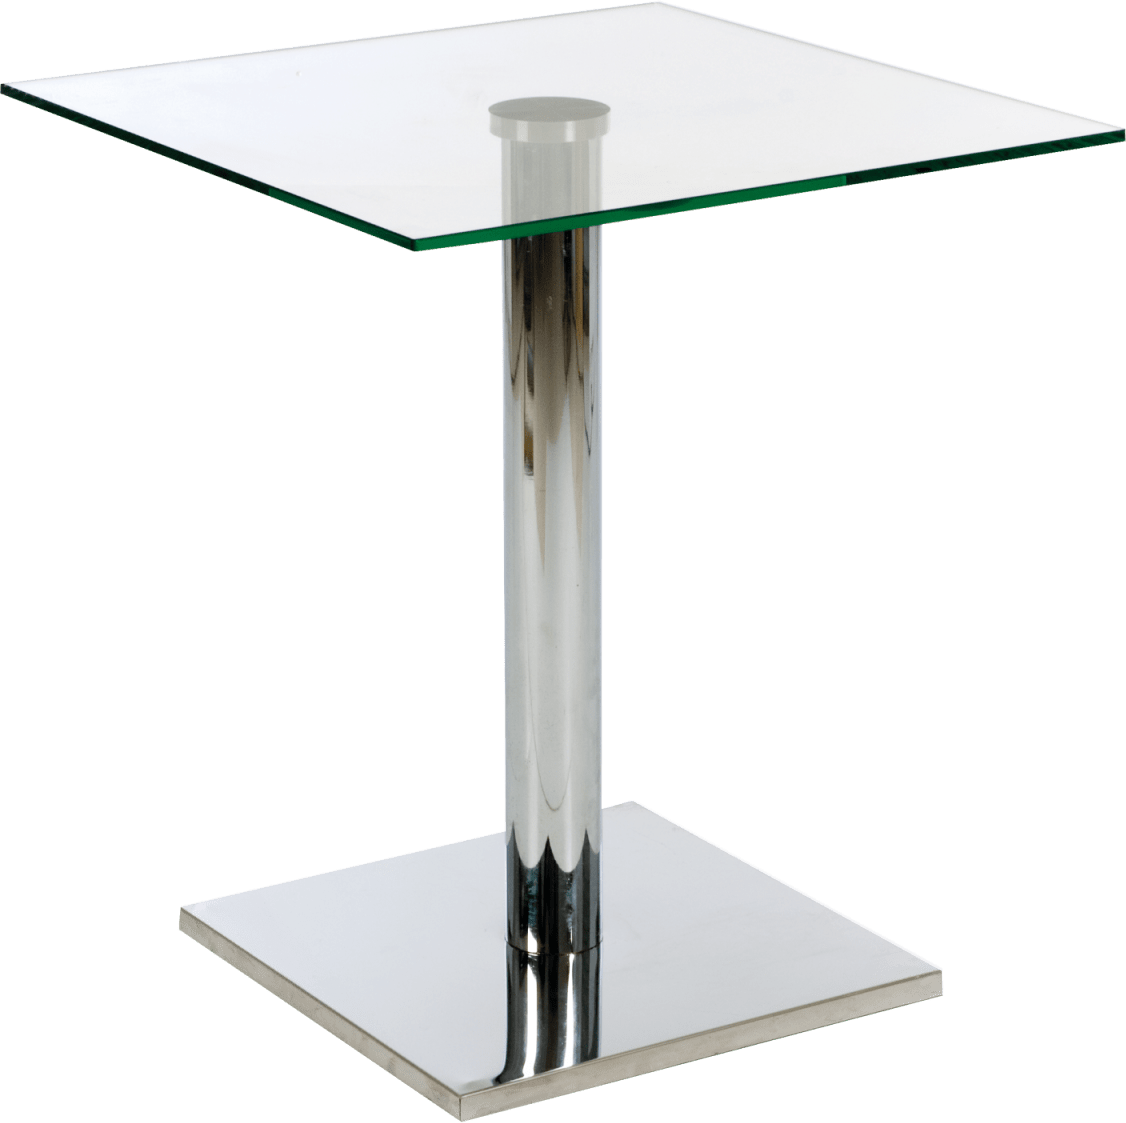 Rome Square Bistro Table Glass Top Hire for Events